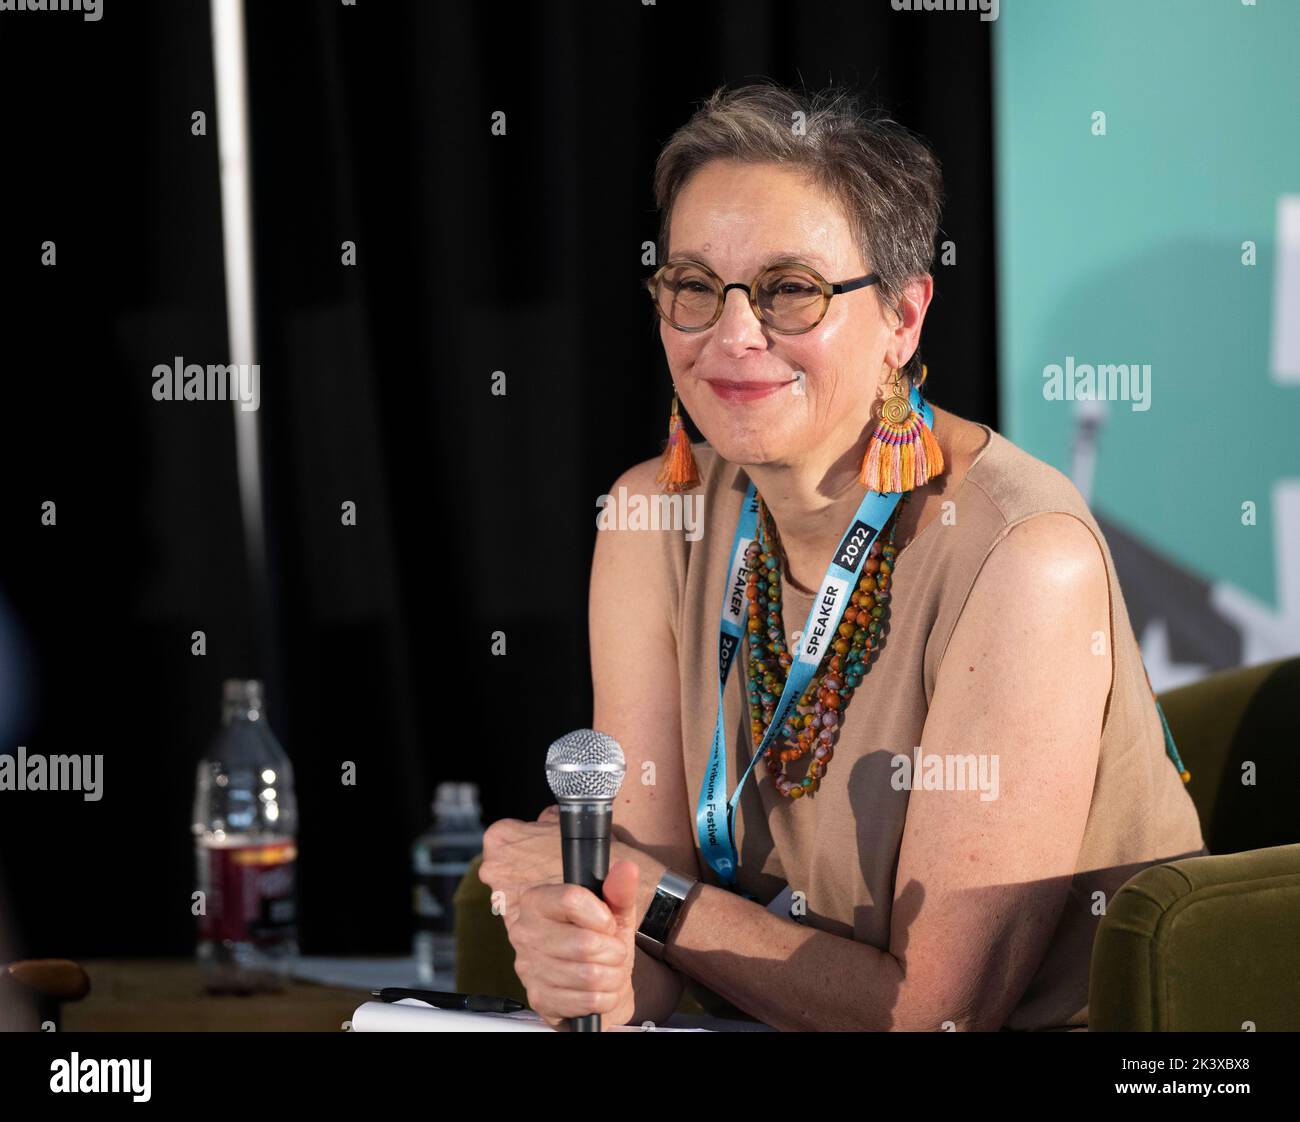 Executive Editor of Texas Monthly MIMI SWARTZ during an interview session at the annual Texas Tribune Festival in downtown Austin on September 24, 2022. Stock Photo